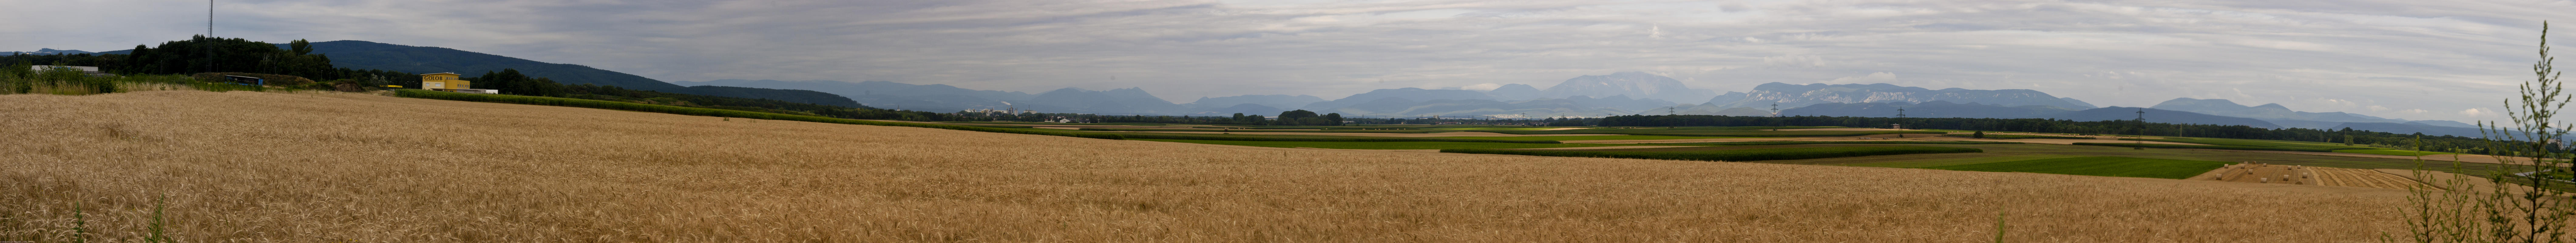 ﻿Beautiful landscape. Fields with mountains on the horizon.